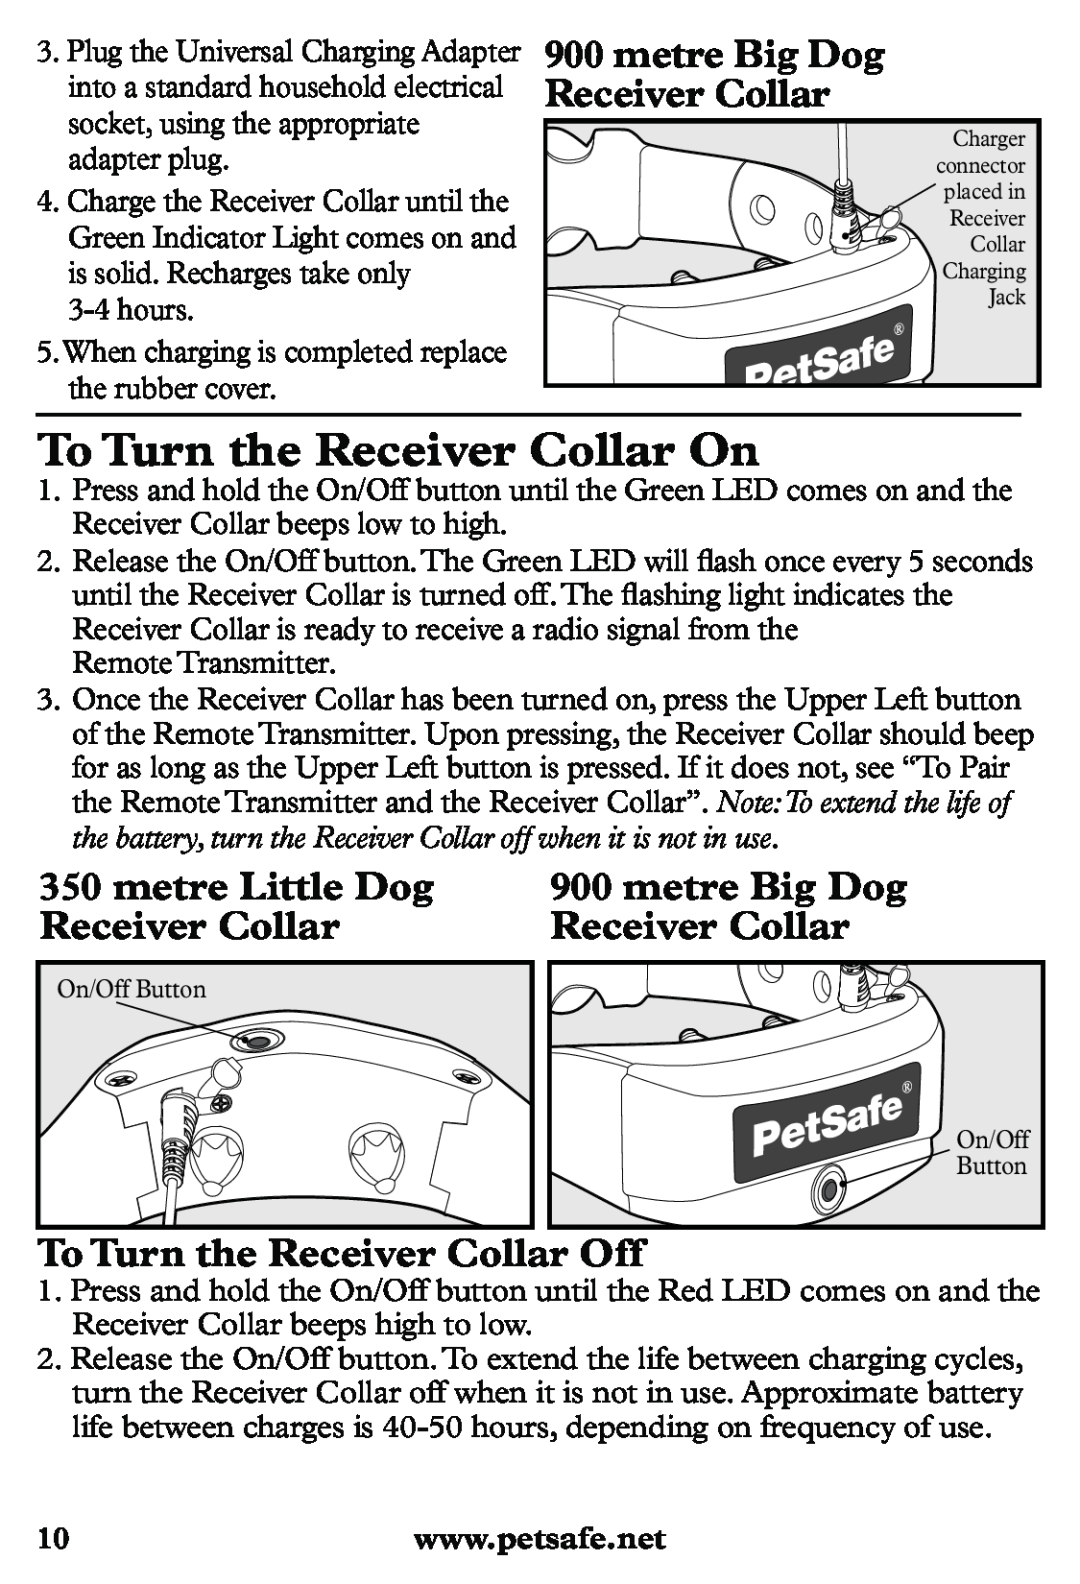 Petsafe PDT20-11939 To Turn the Receiver Collar On, To Turn the Receiver Collar Off, metre Big Dog Receiver Collar 